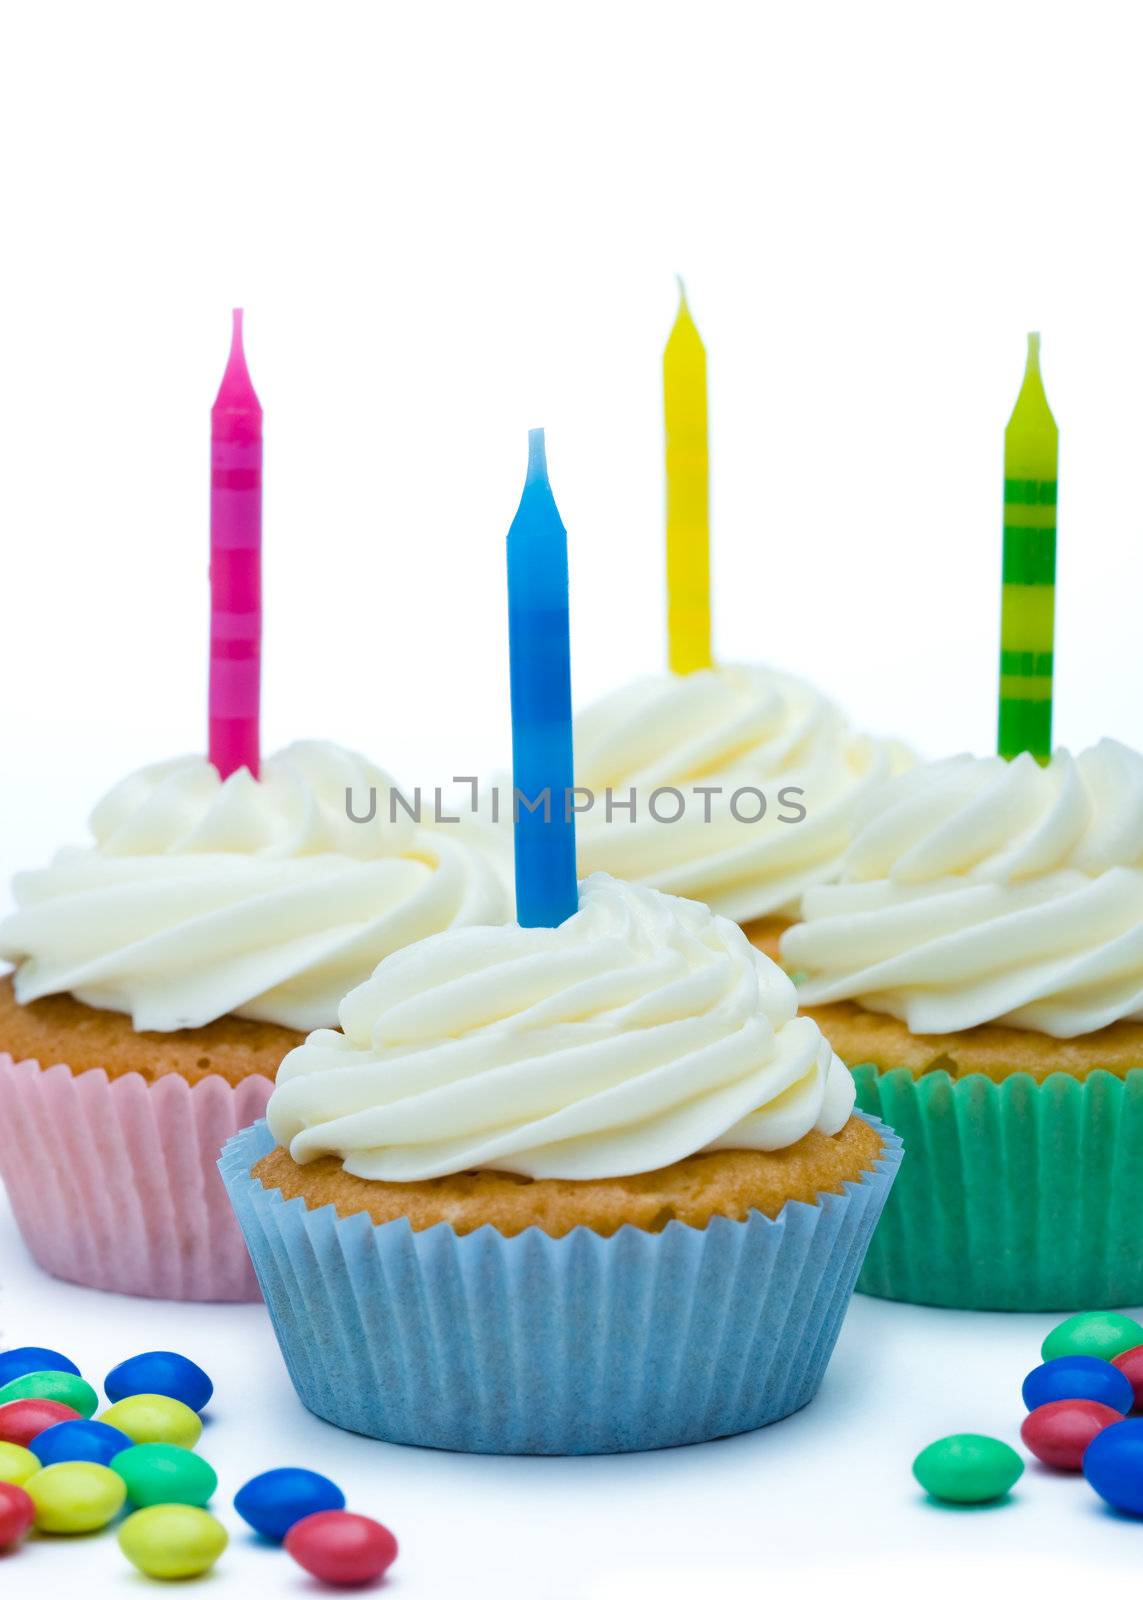 Cupcakes decorated with brightly colored candles